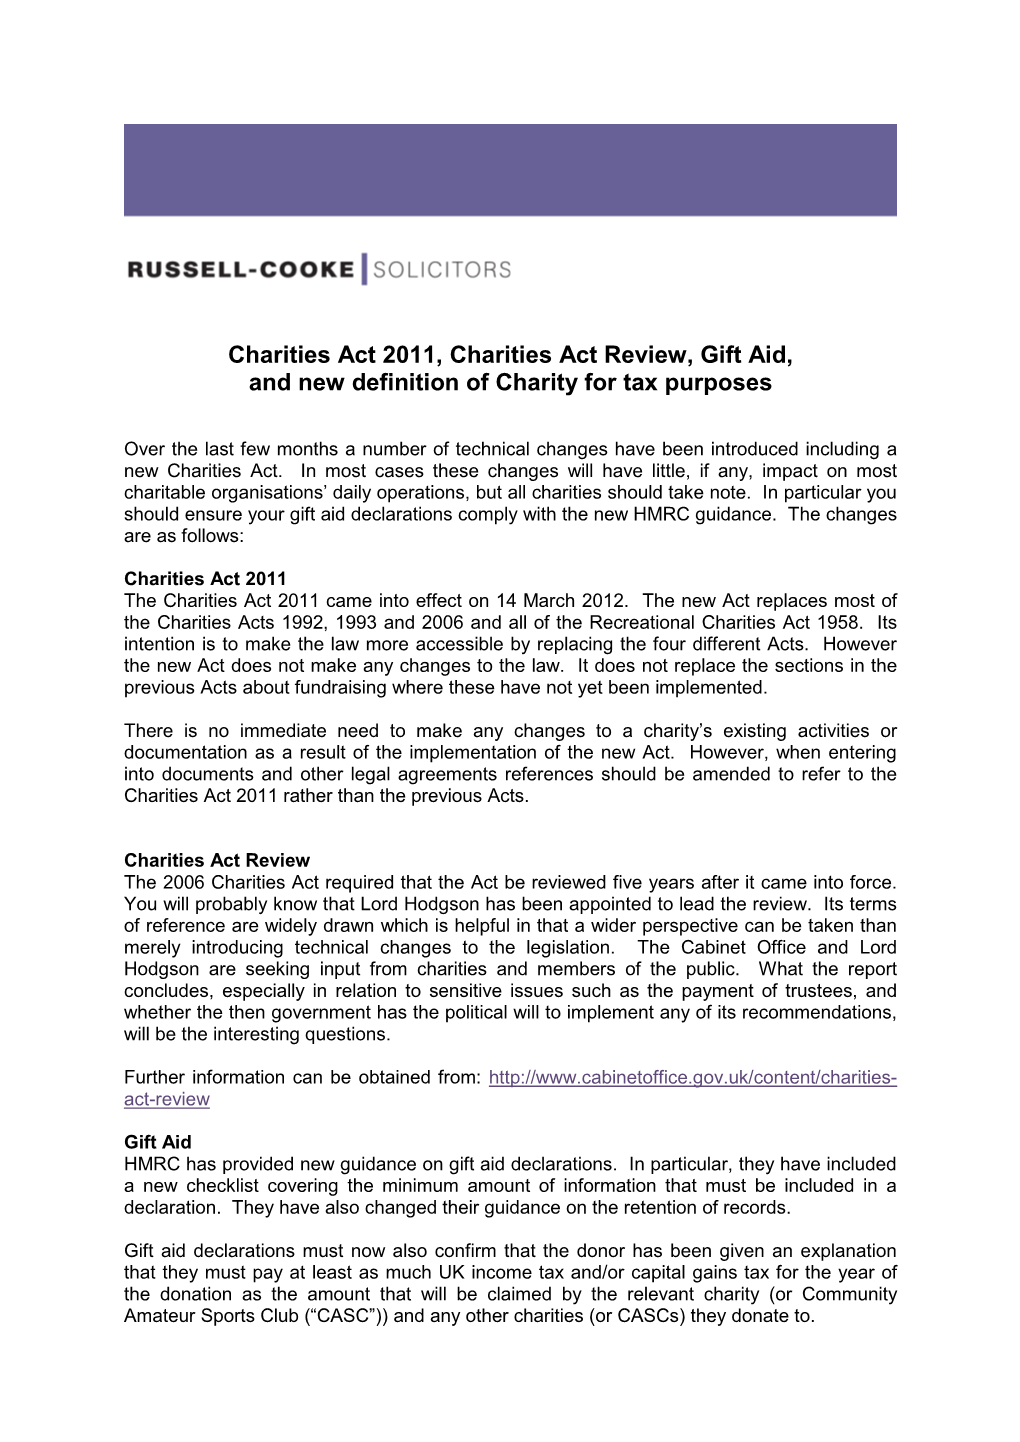 Charities Act 2011, Charities Act Review, Gift Aid, and New Definition of Charity for Tax Purposes